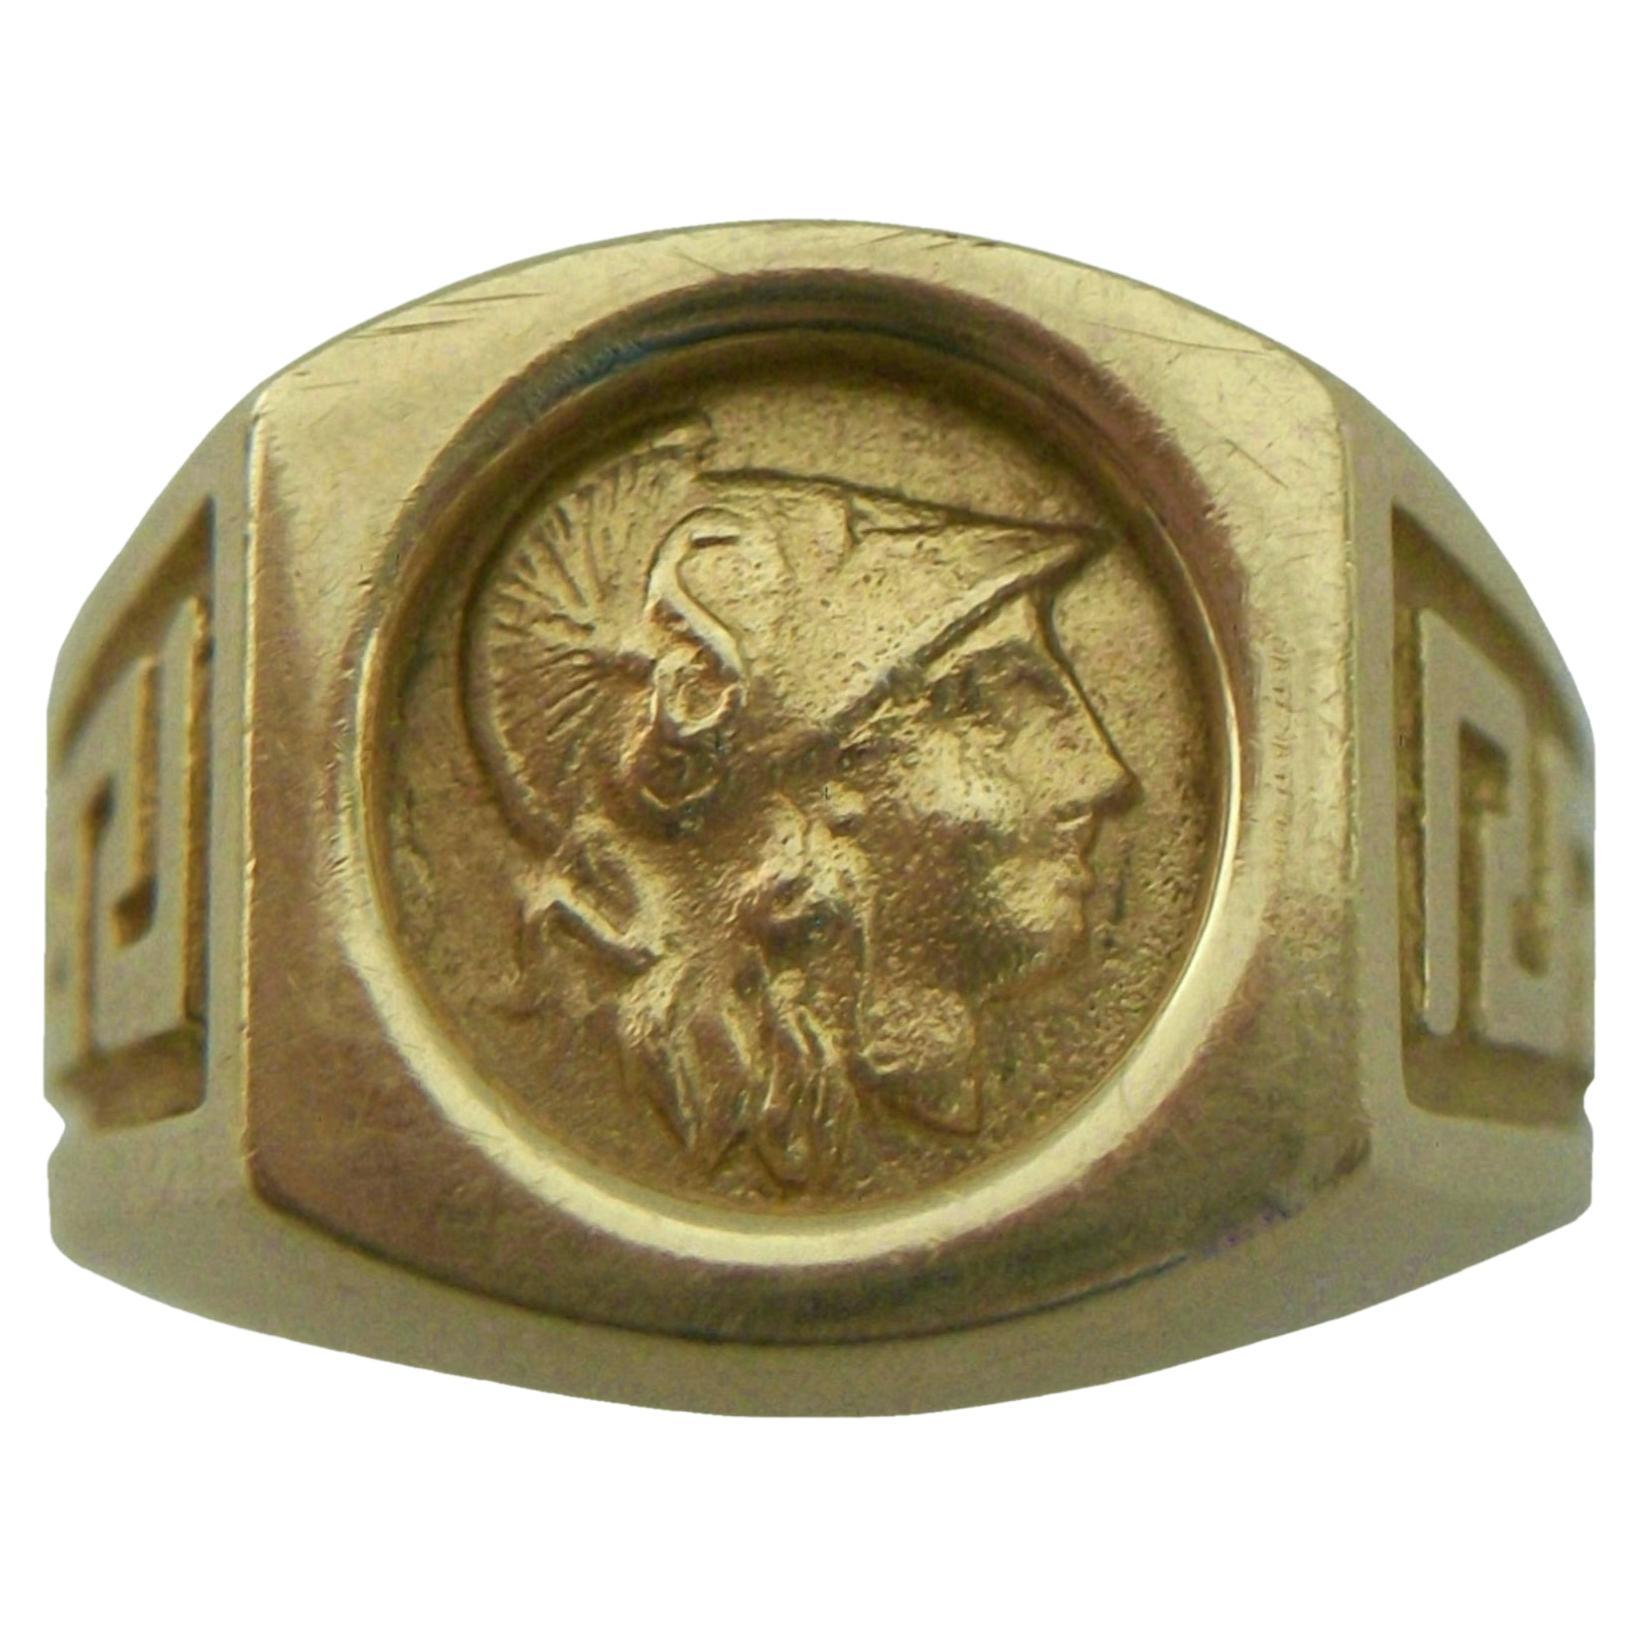 Ancient Greek 4th Century (330 BC - 220 BC) Alexander the Great 1/4 Stater gold coin (22K gold) - the antique coin recess mounted (prong set from behind) in a 14K yellow gold ring setting with Greek key details to the shoulders - warm aged patina -